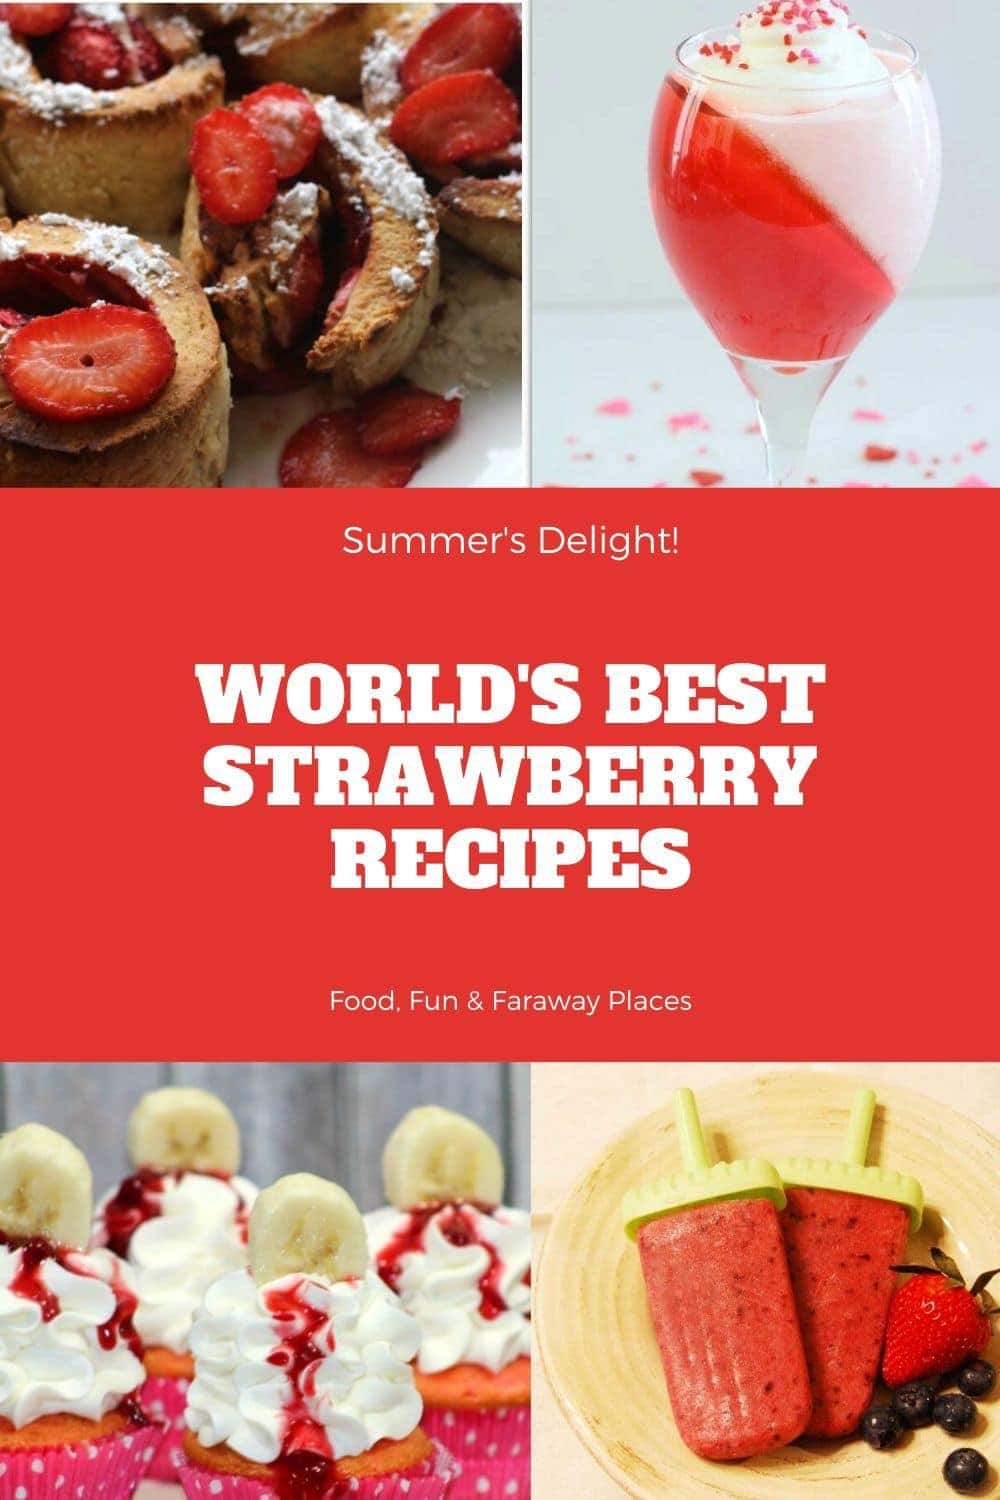 strawberry recipes on a Pinterest image